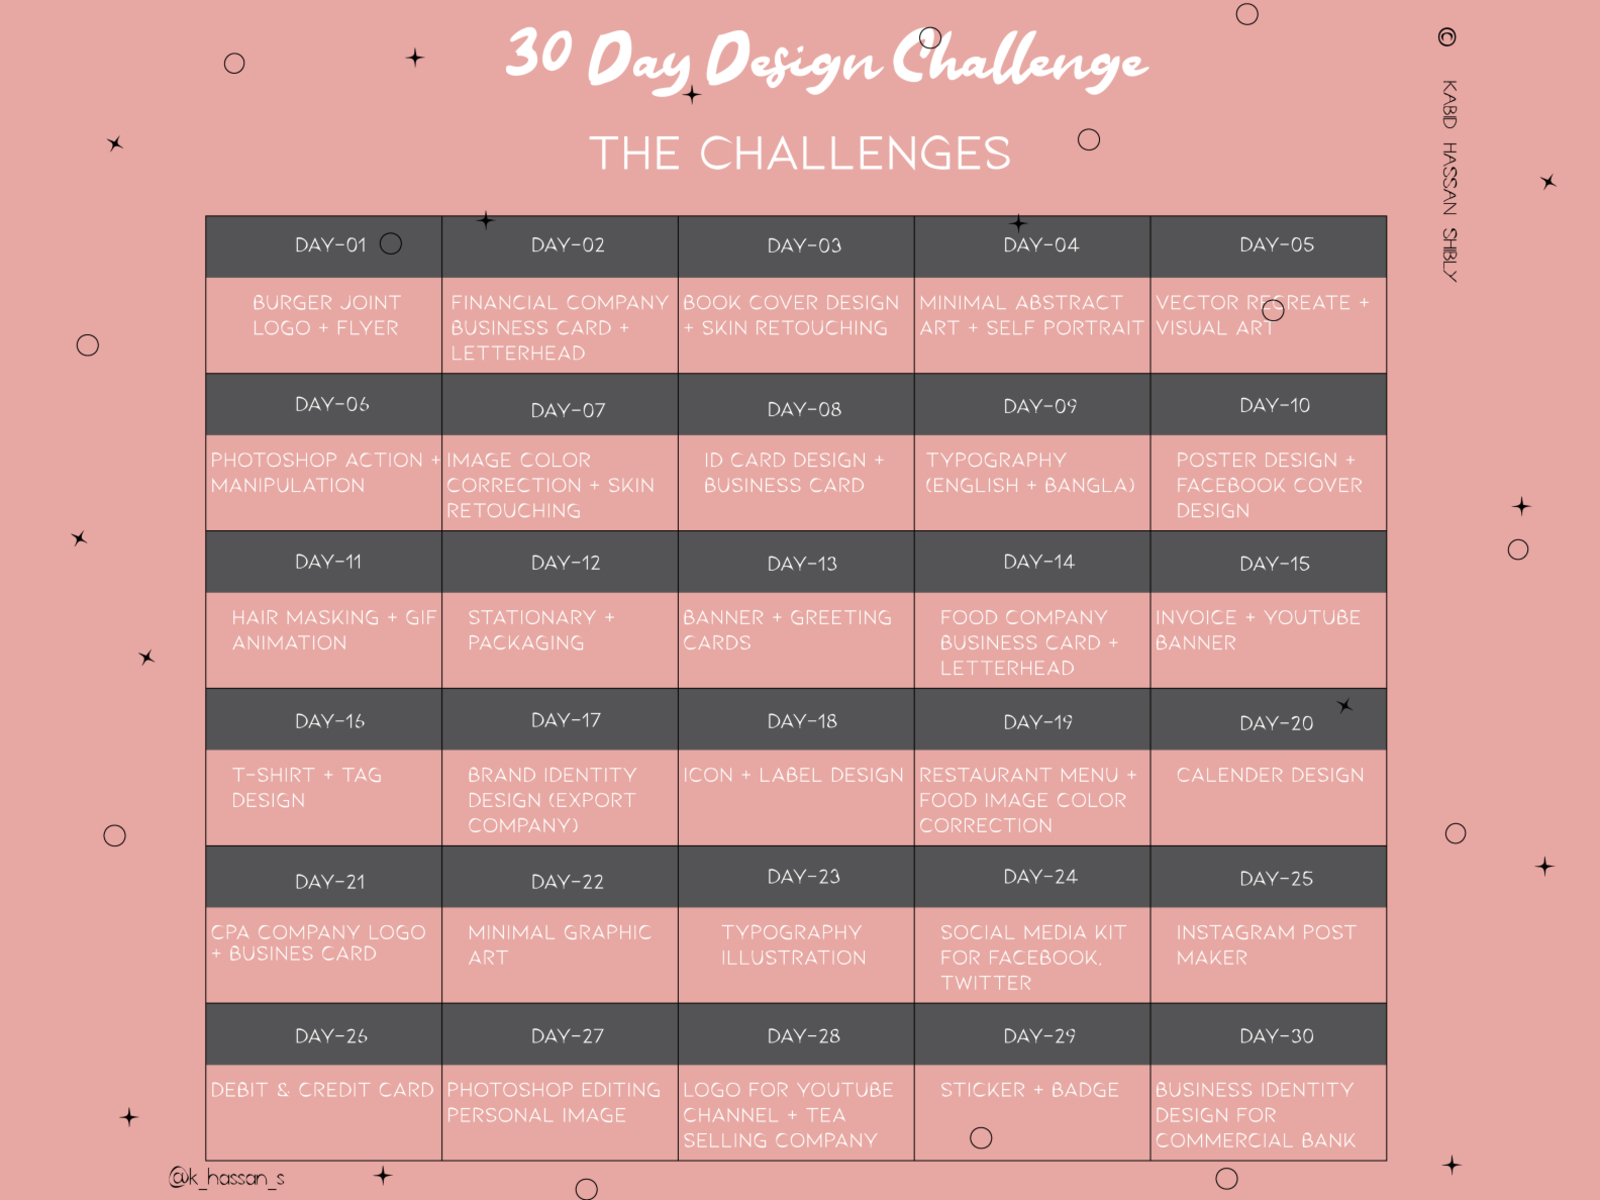 30 day Graphic Design challenge by Kabid Hassan Shibly on Dribbble